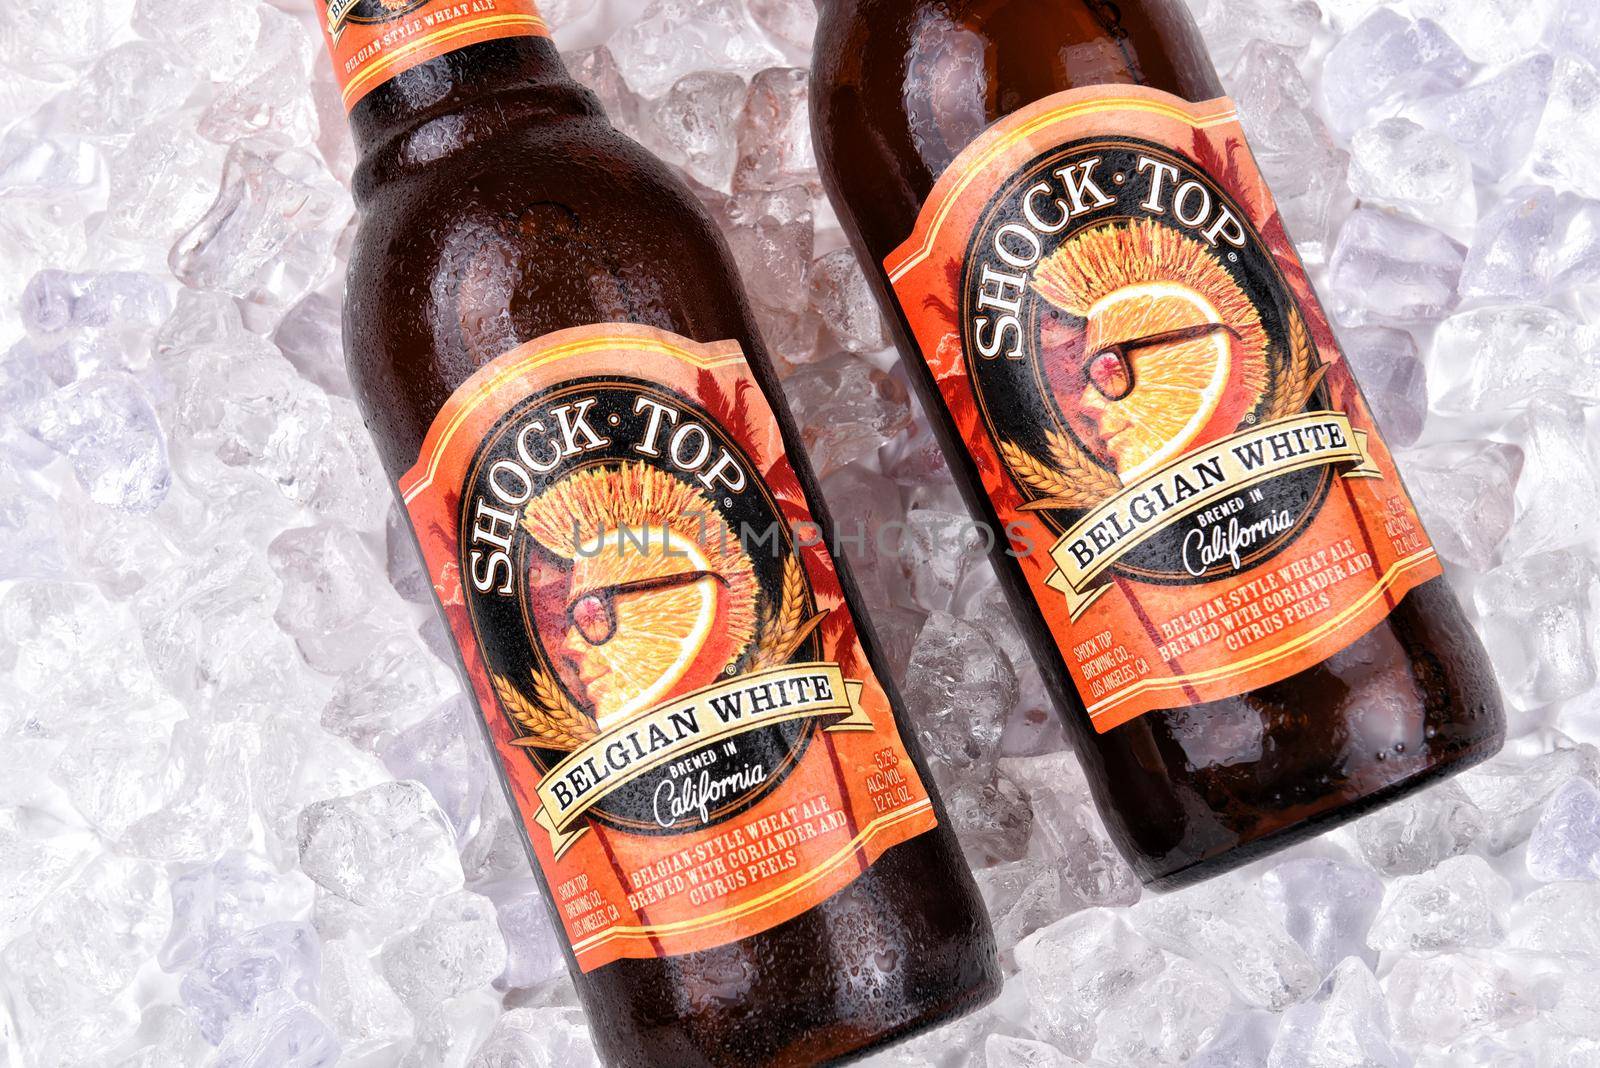 IRVINE, CALIFORNIA - AUGUST 25, 2016: Shock Top Belgian White bottles in ice. Introduced as a seasonal beer in 2006, it has, since 2007, been available year-round.